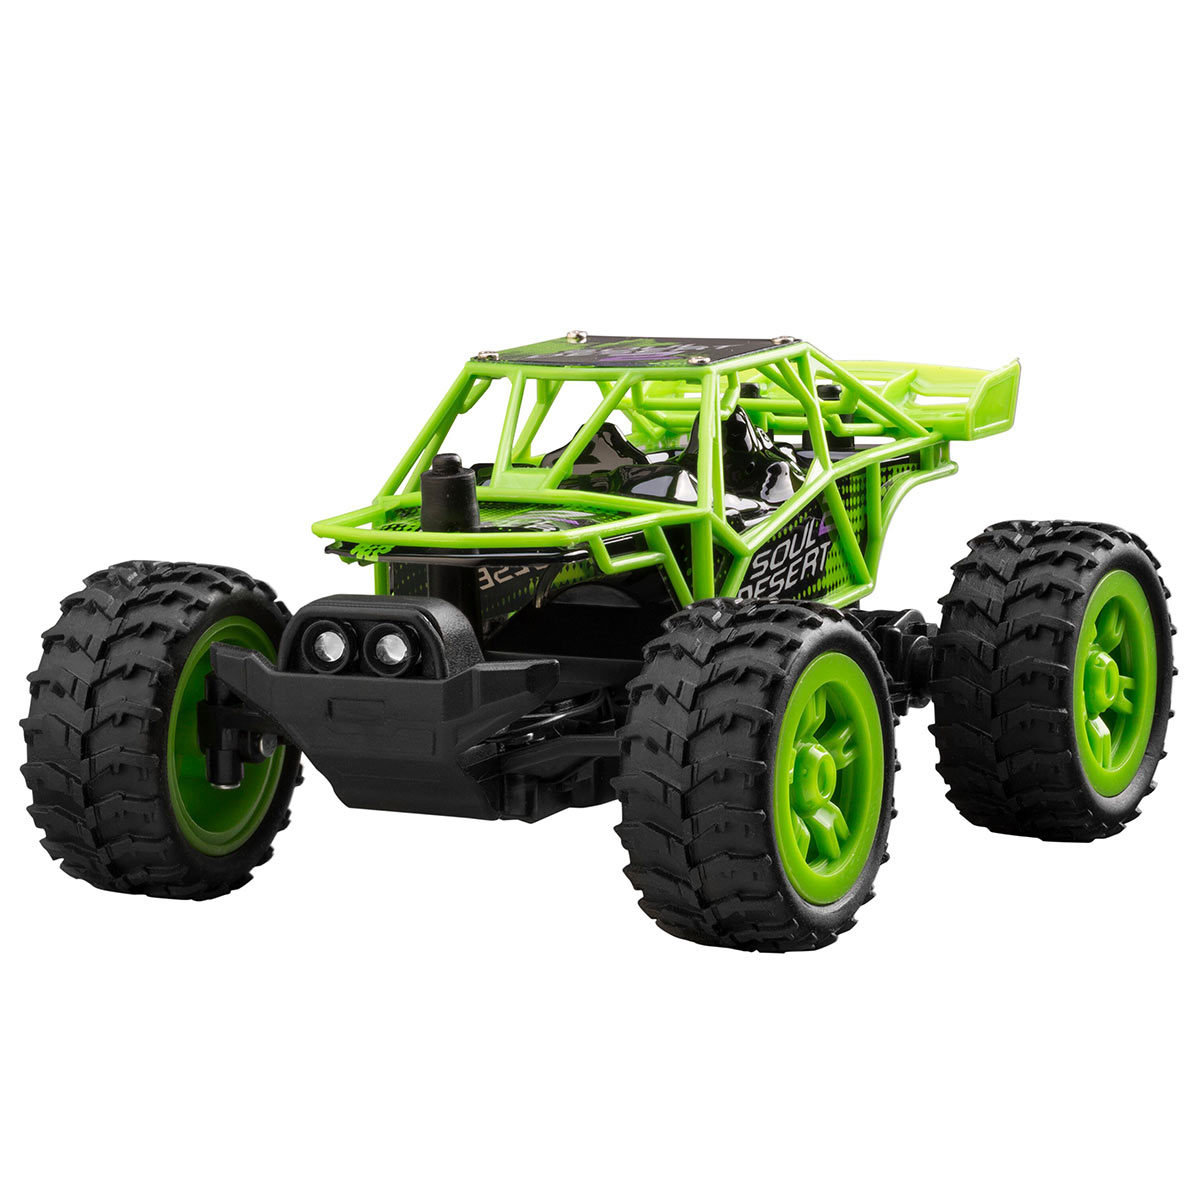 Propel Power craze rc in green on white background